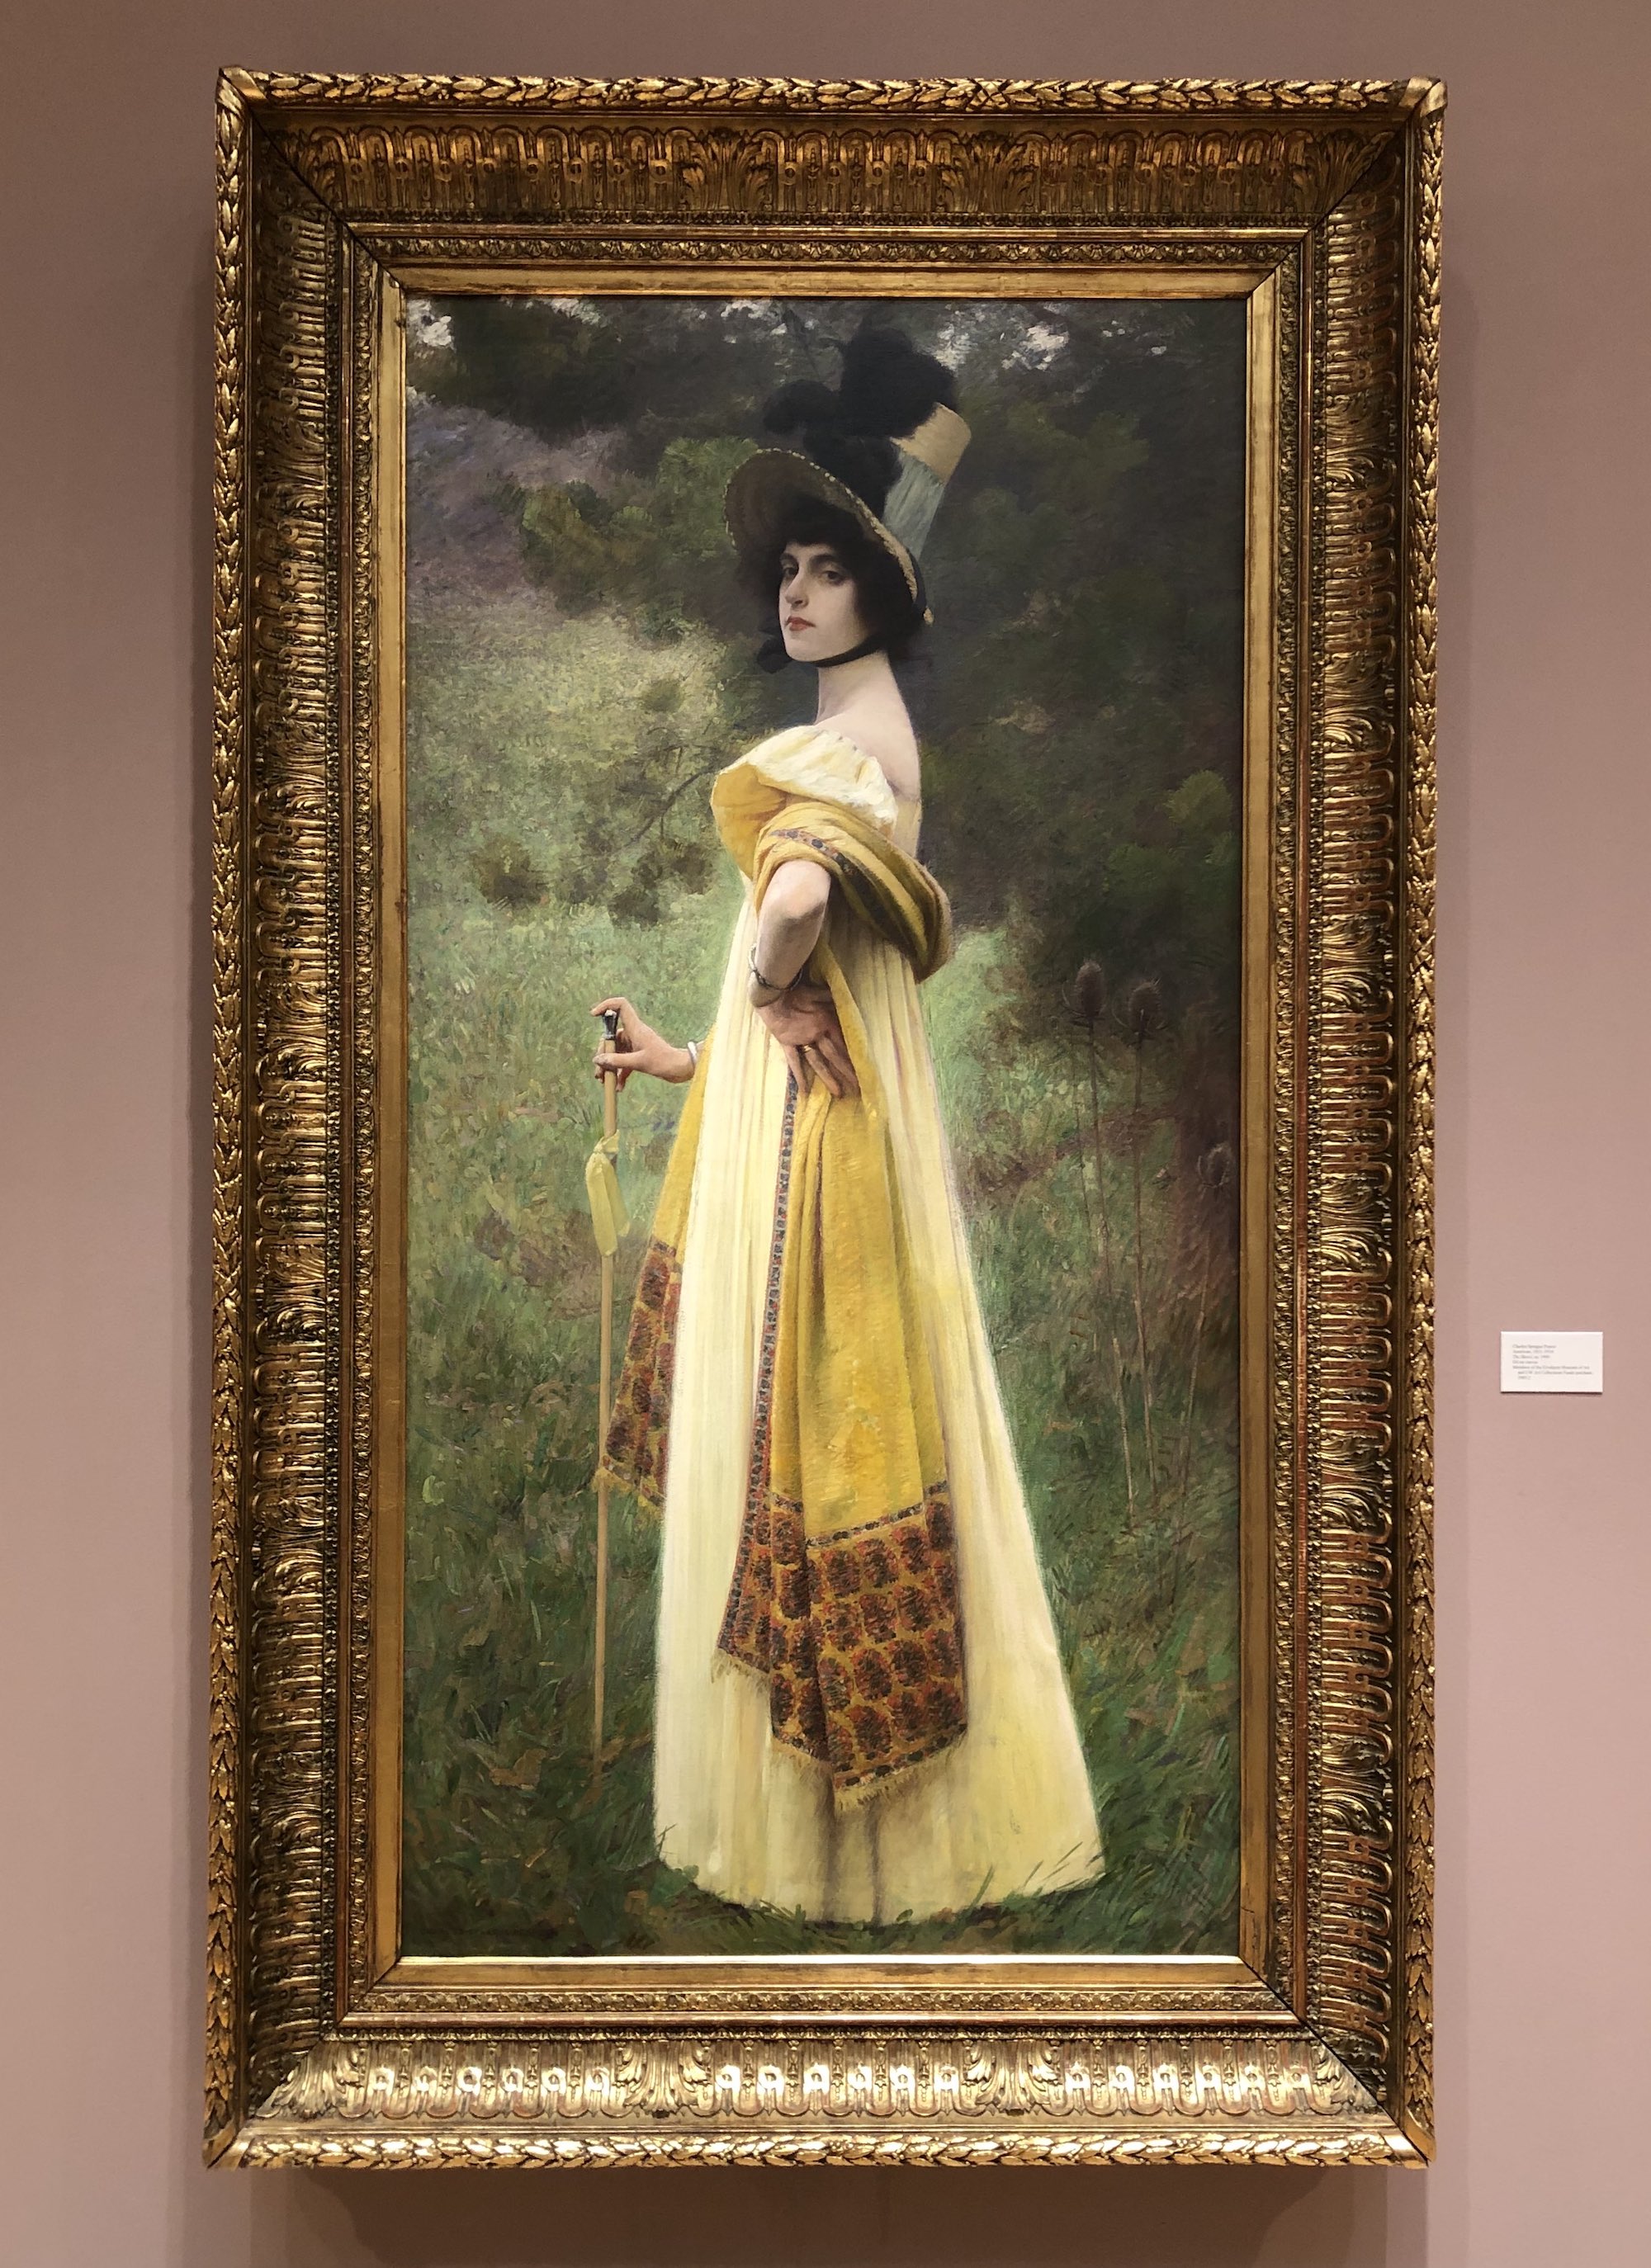 The Shawl painting by Charles Sprague Pearce at the Chazen Museum of Art.